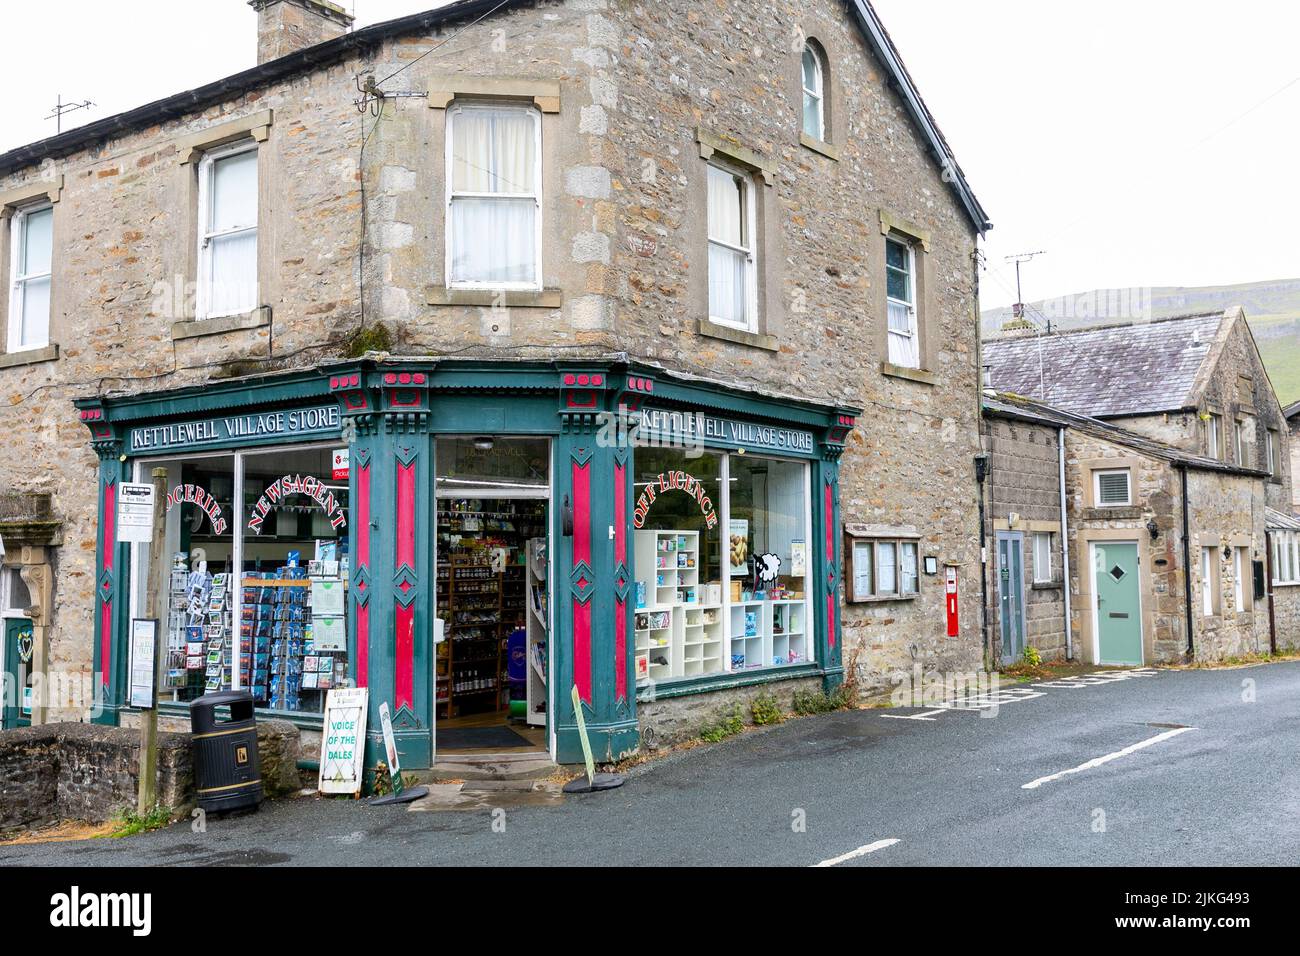 Kettlewell village in the Yorkshire Dales, and Kettlewell village store corner shop,Yorkshire,England,UK, summers day 2022 Stock Photo